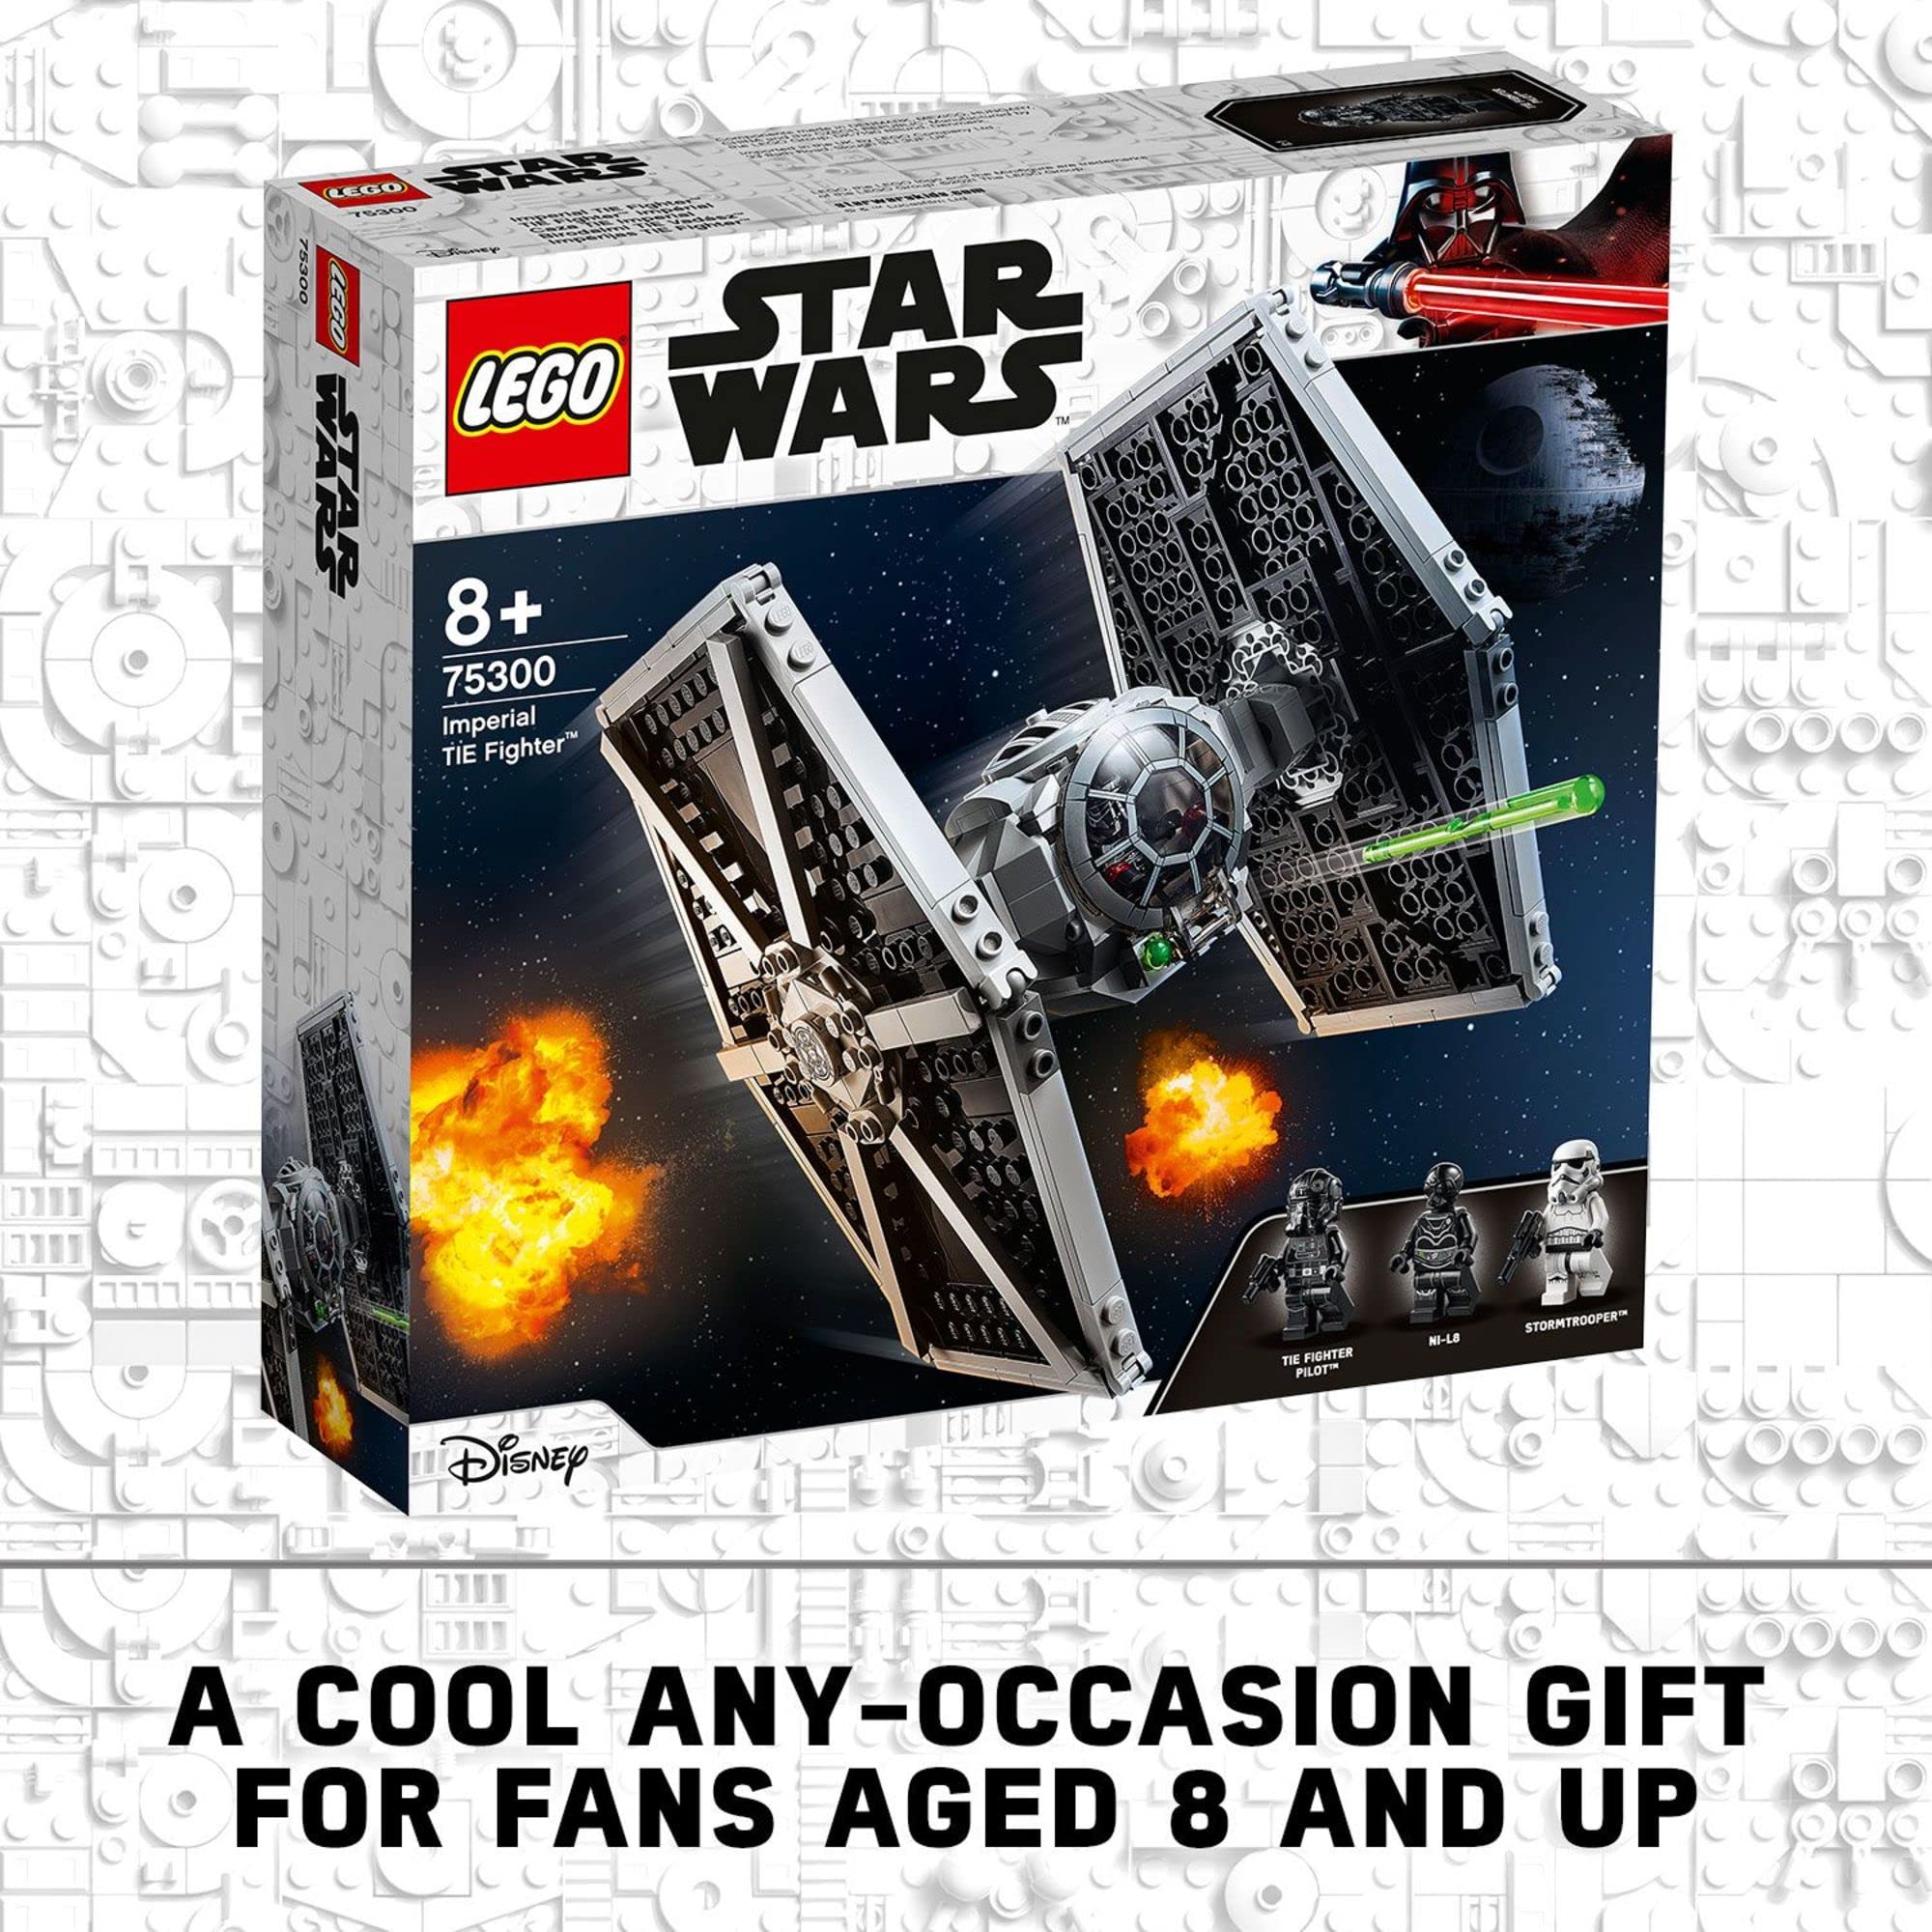 Lego Star Wars Imperial TIE Fighter 75300 Building Toy with Stormtrooper and Pilot Minifigures from The Skywalker Saga